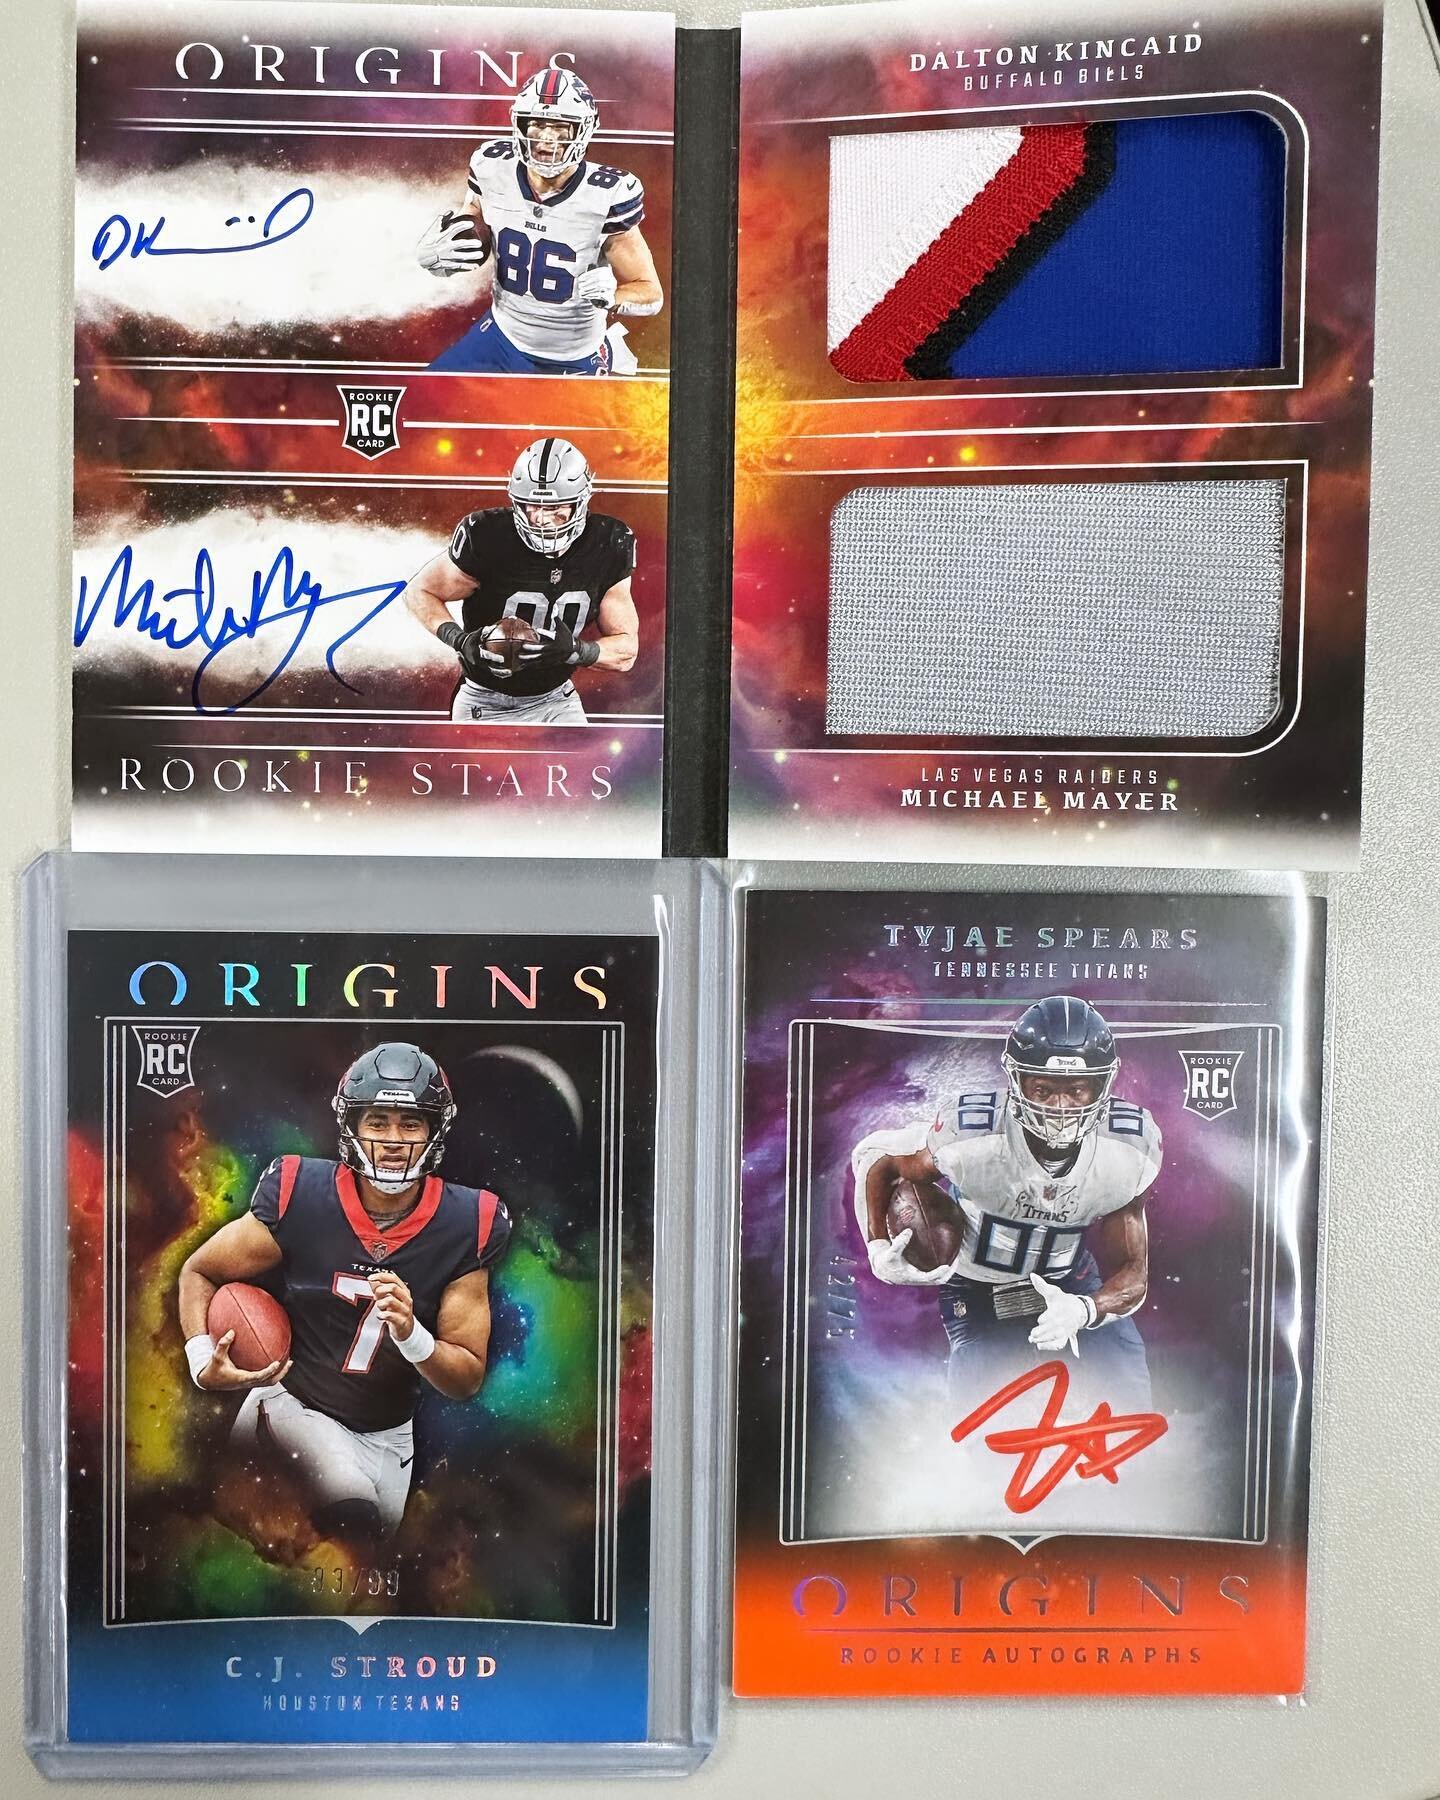 Great box of Origins for our buddy Ben @st_louis_breaks !! Congrats on the amazing booklet and the Stroud!